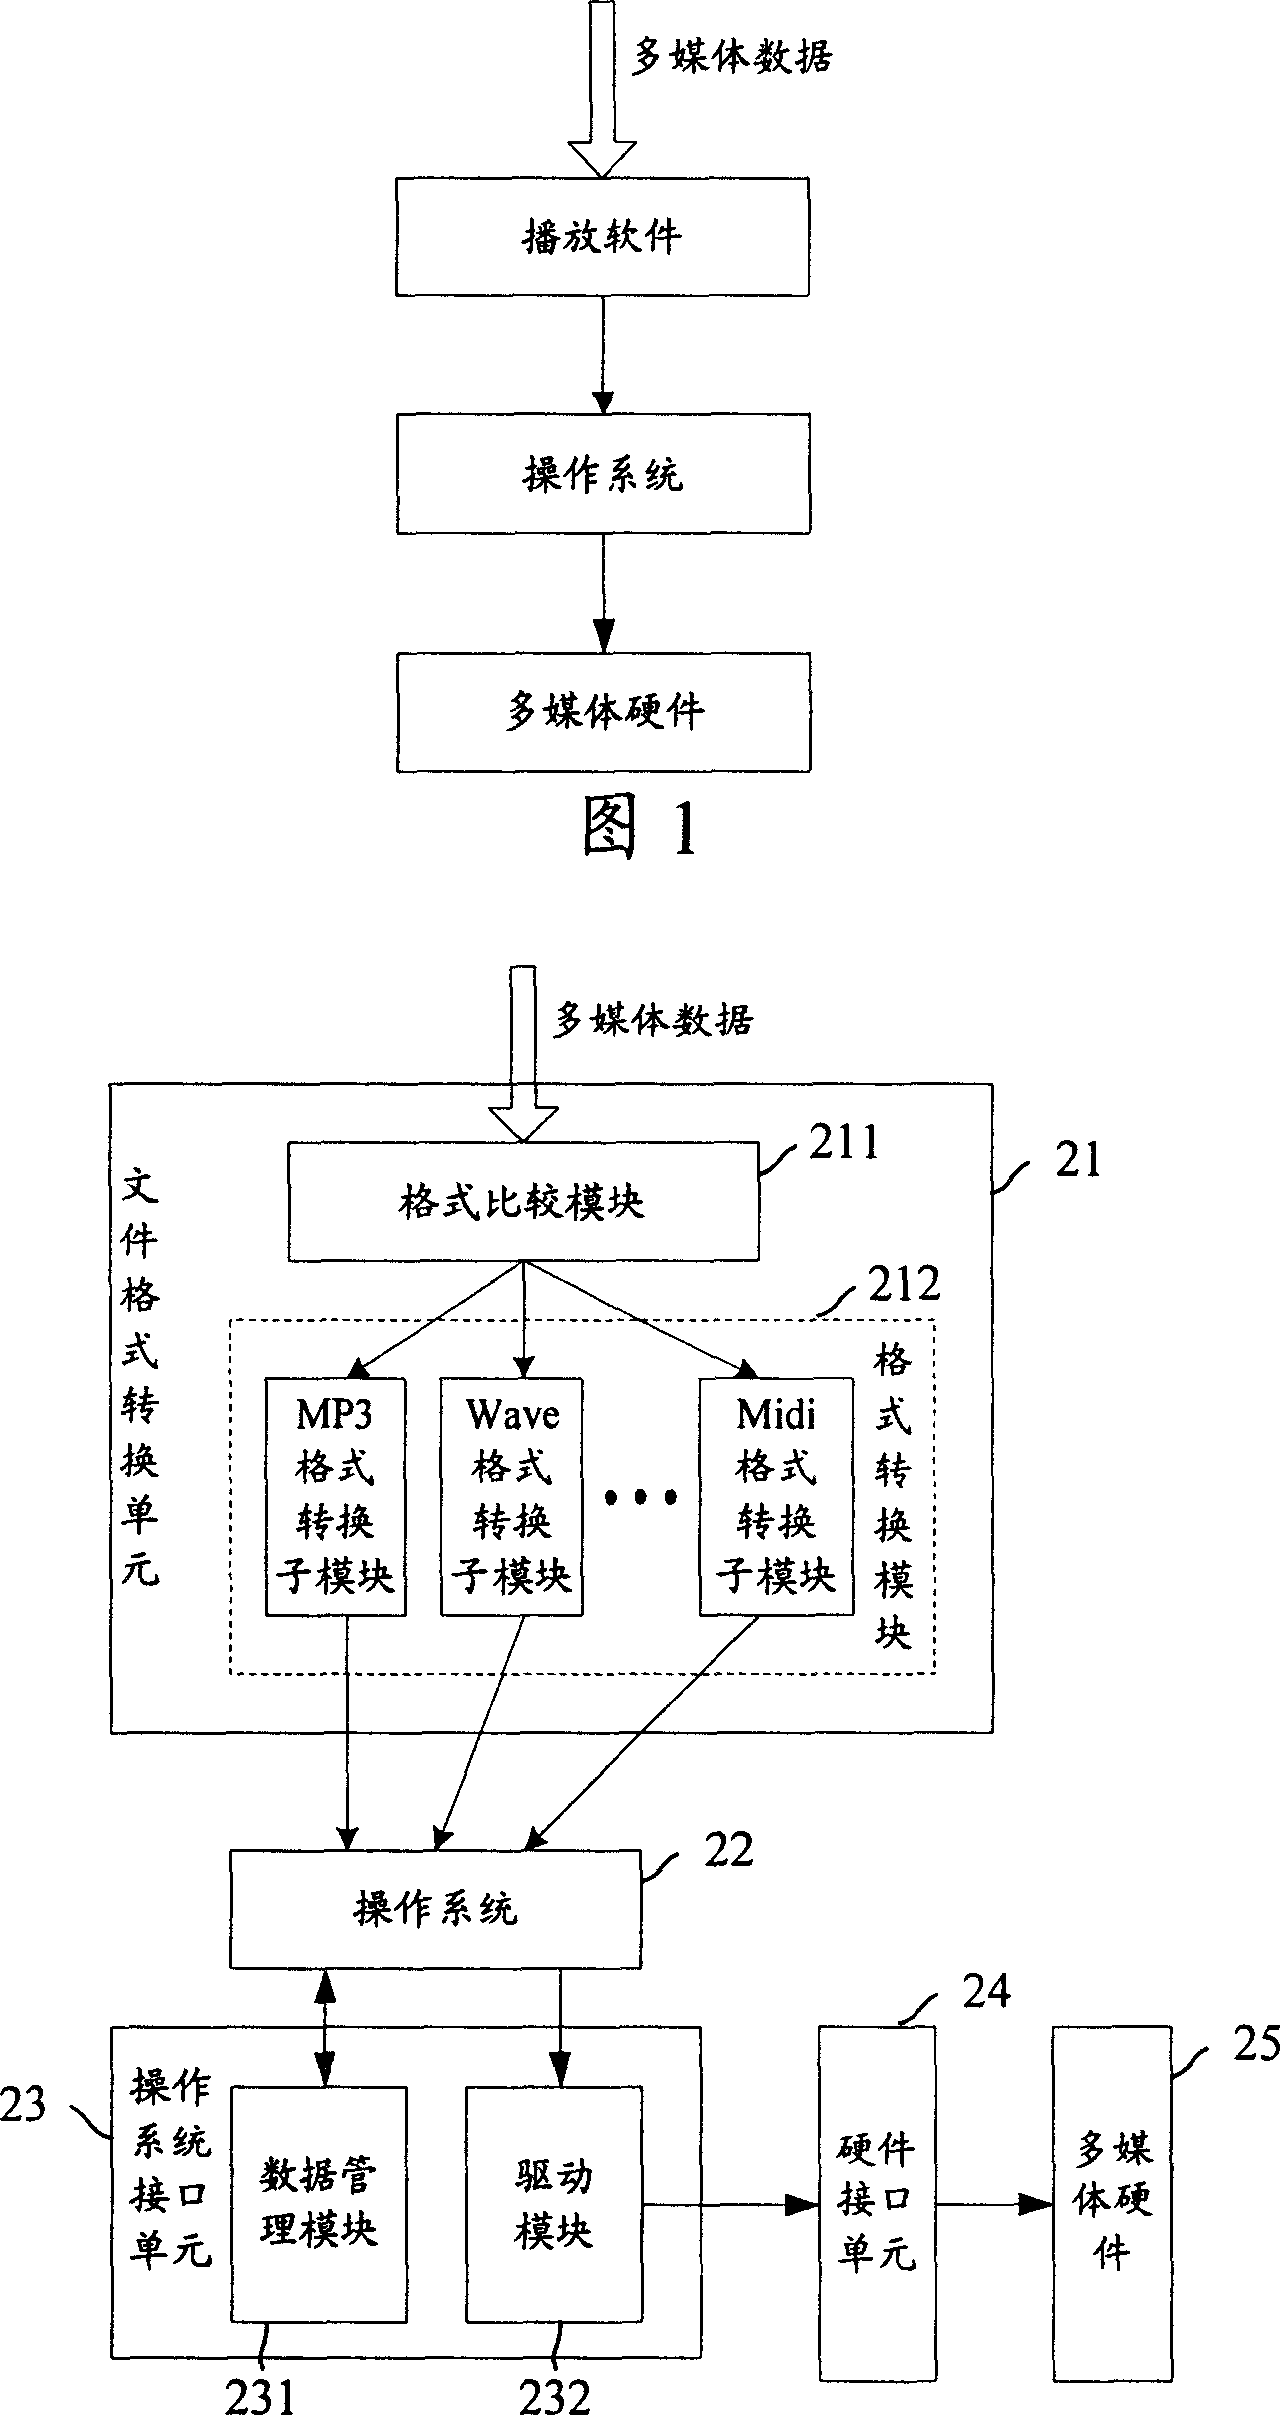 Co-phase multimedia integrated playing system and method